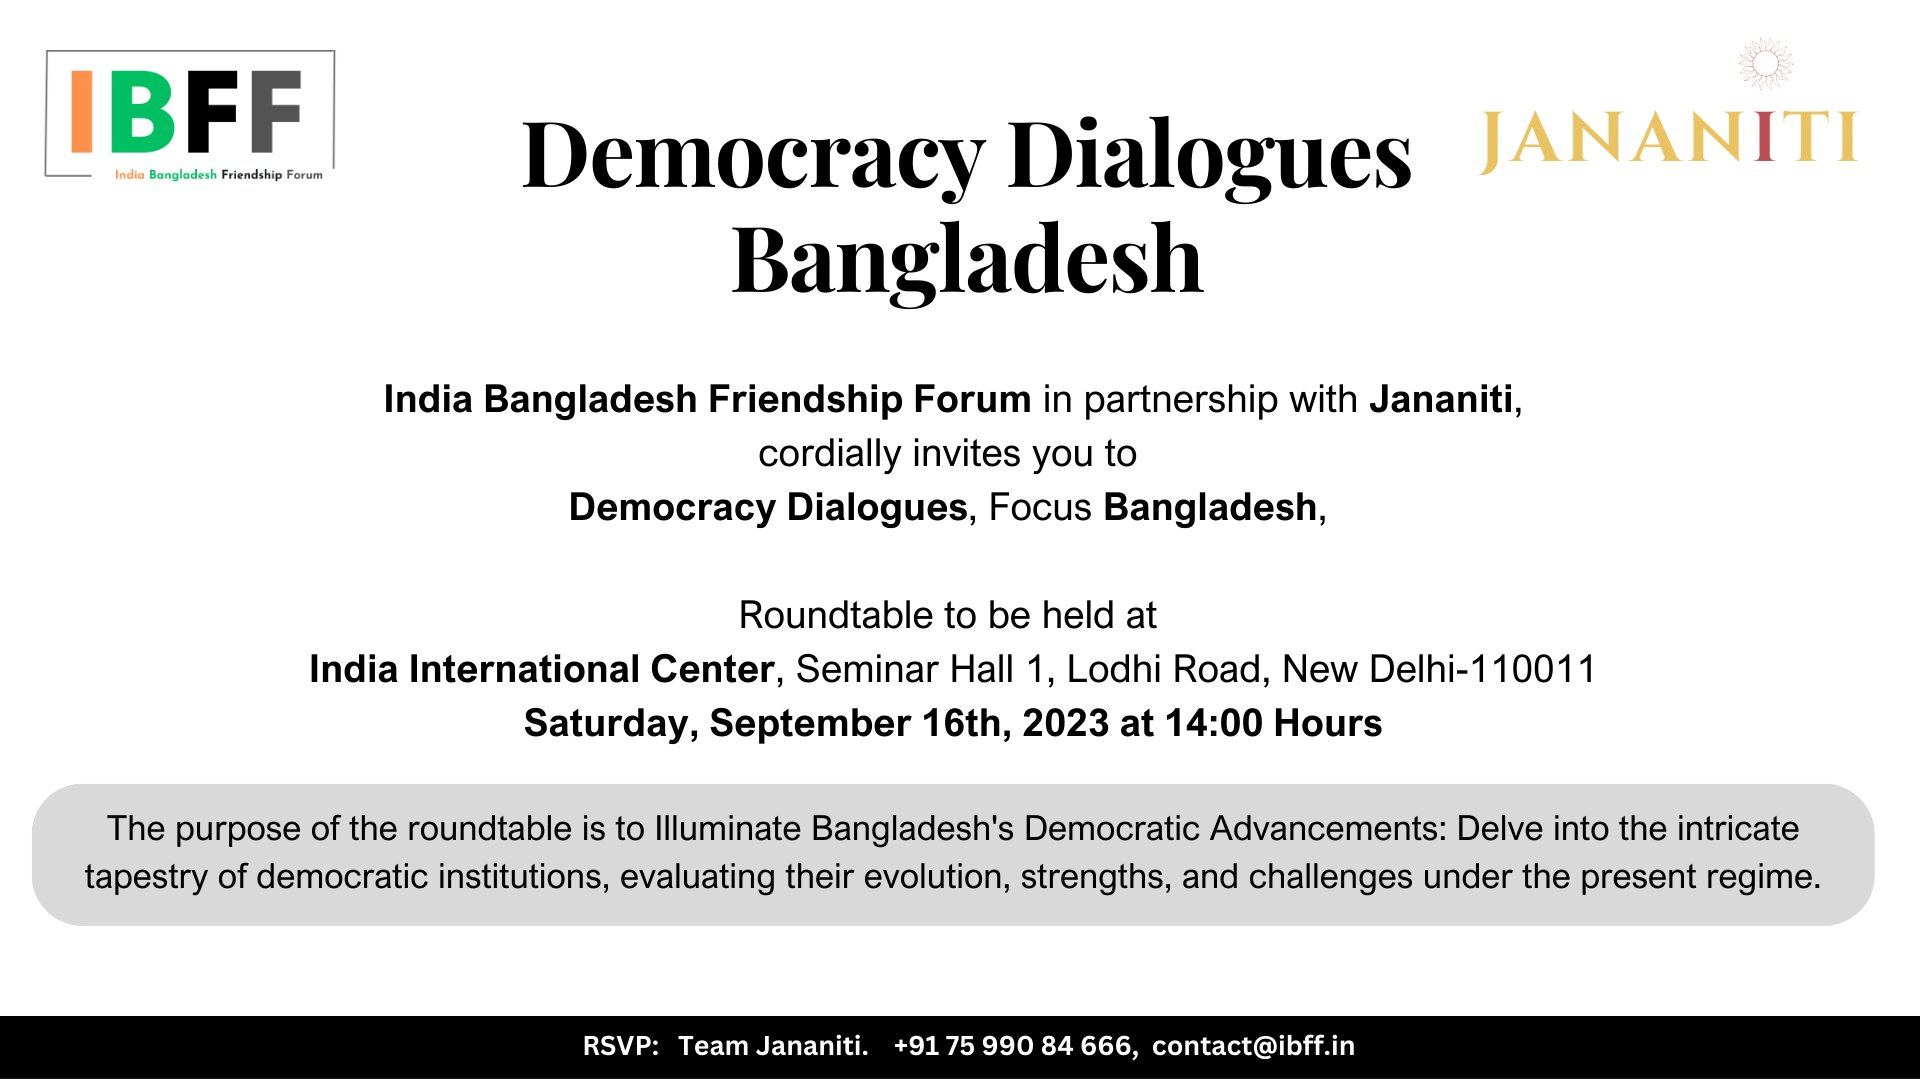 Event Invitation: “Democracy Dialogues – Focus Bangladesh” 16th September, 2023 Afternoon 2:00PM to 5:00PM @ India International Center, New Delhi